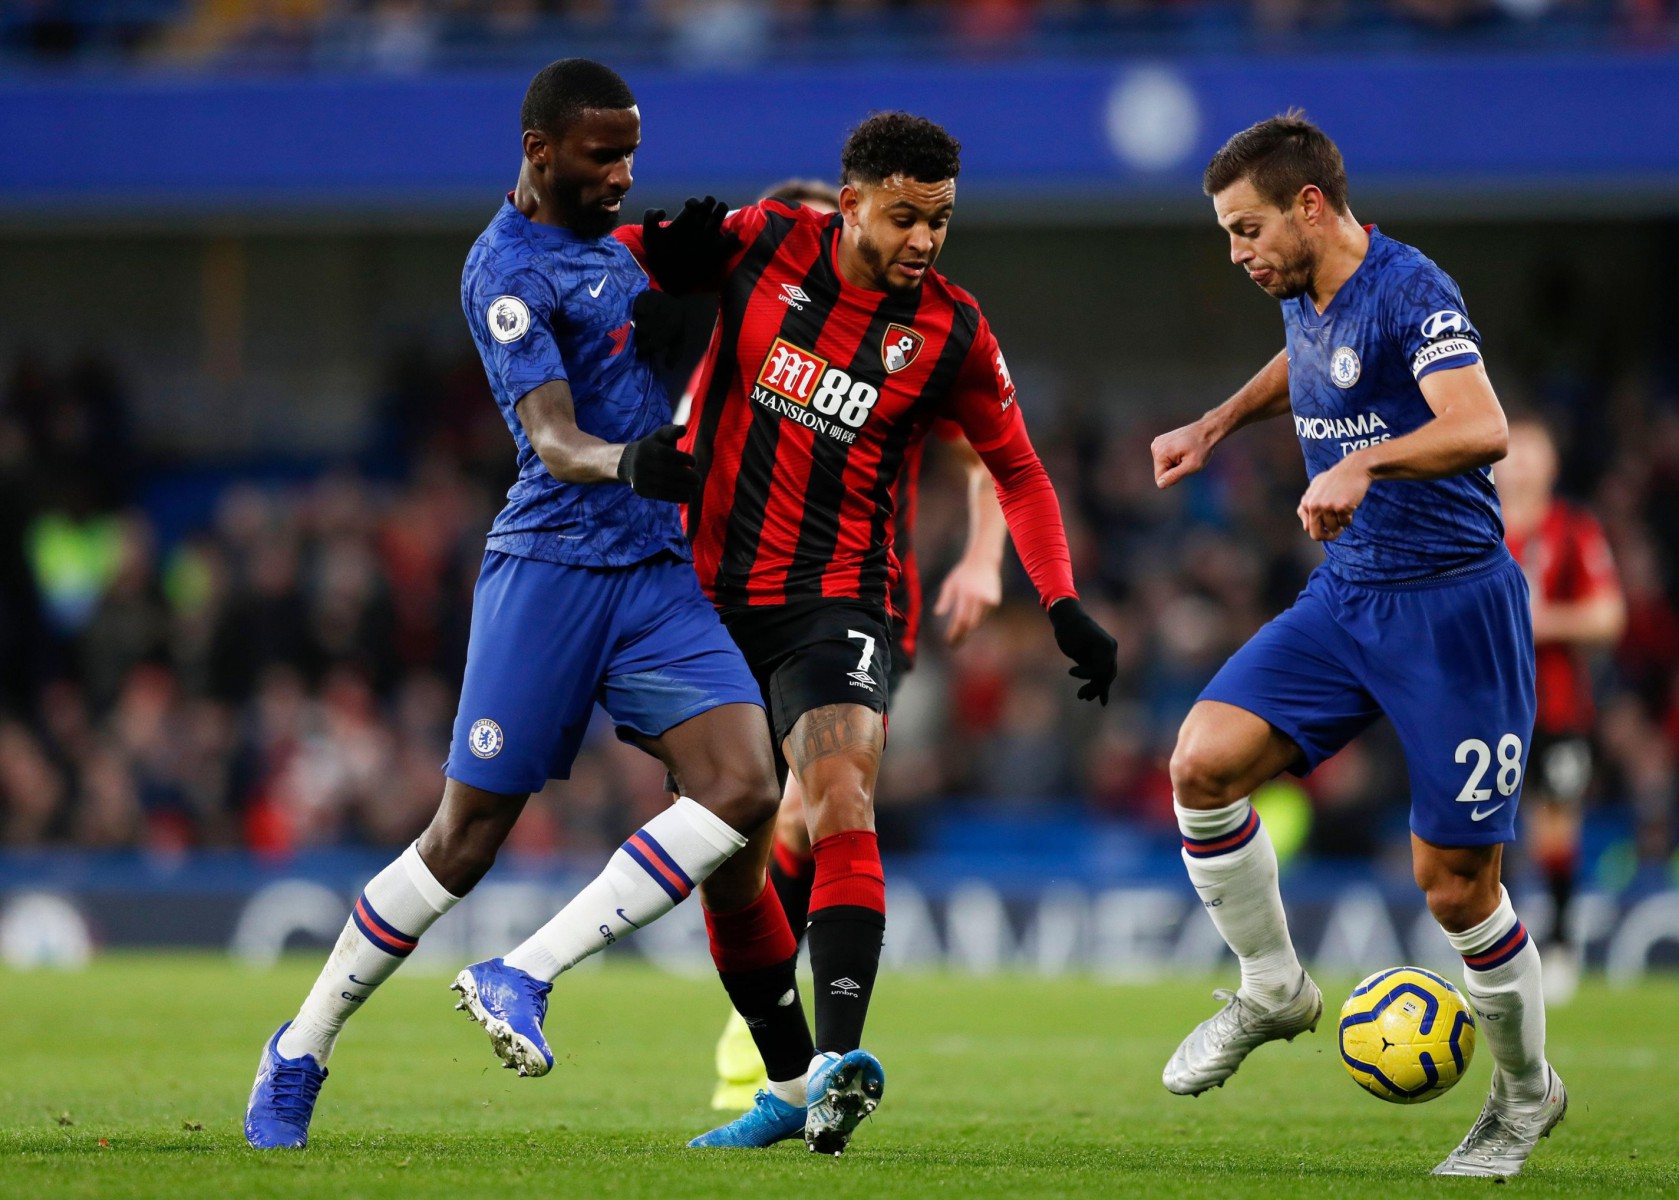 , Chelsea ratings: Ruthless Rudiger led from the back while Emerson made Chilwell transfer look a must in Bournemouth loss